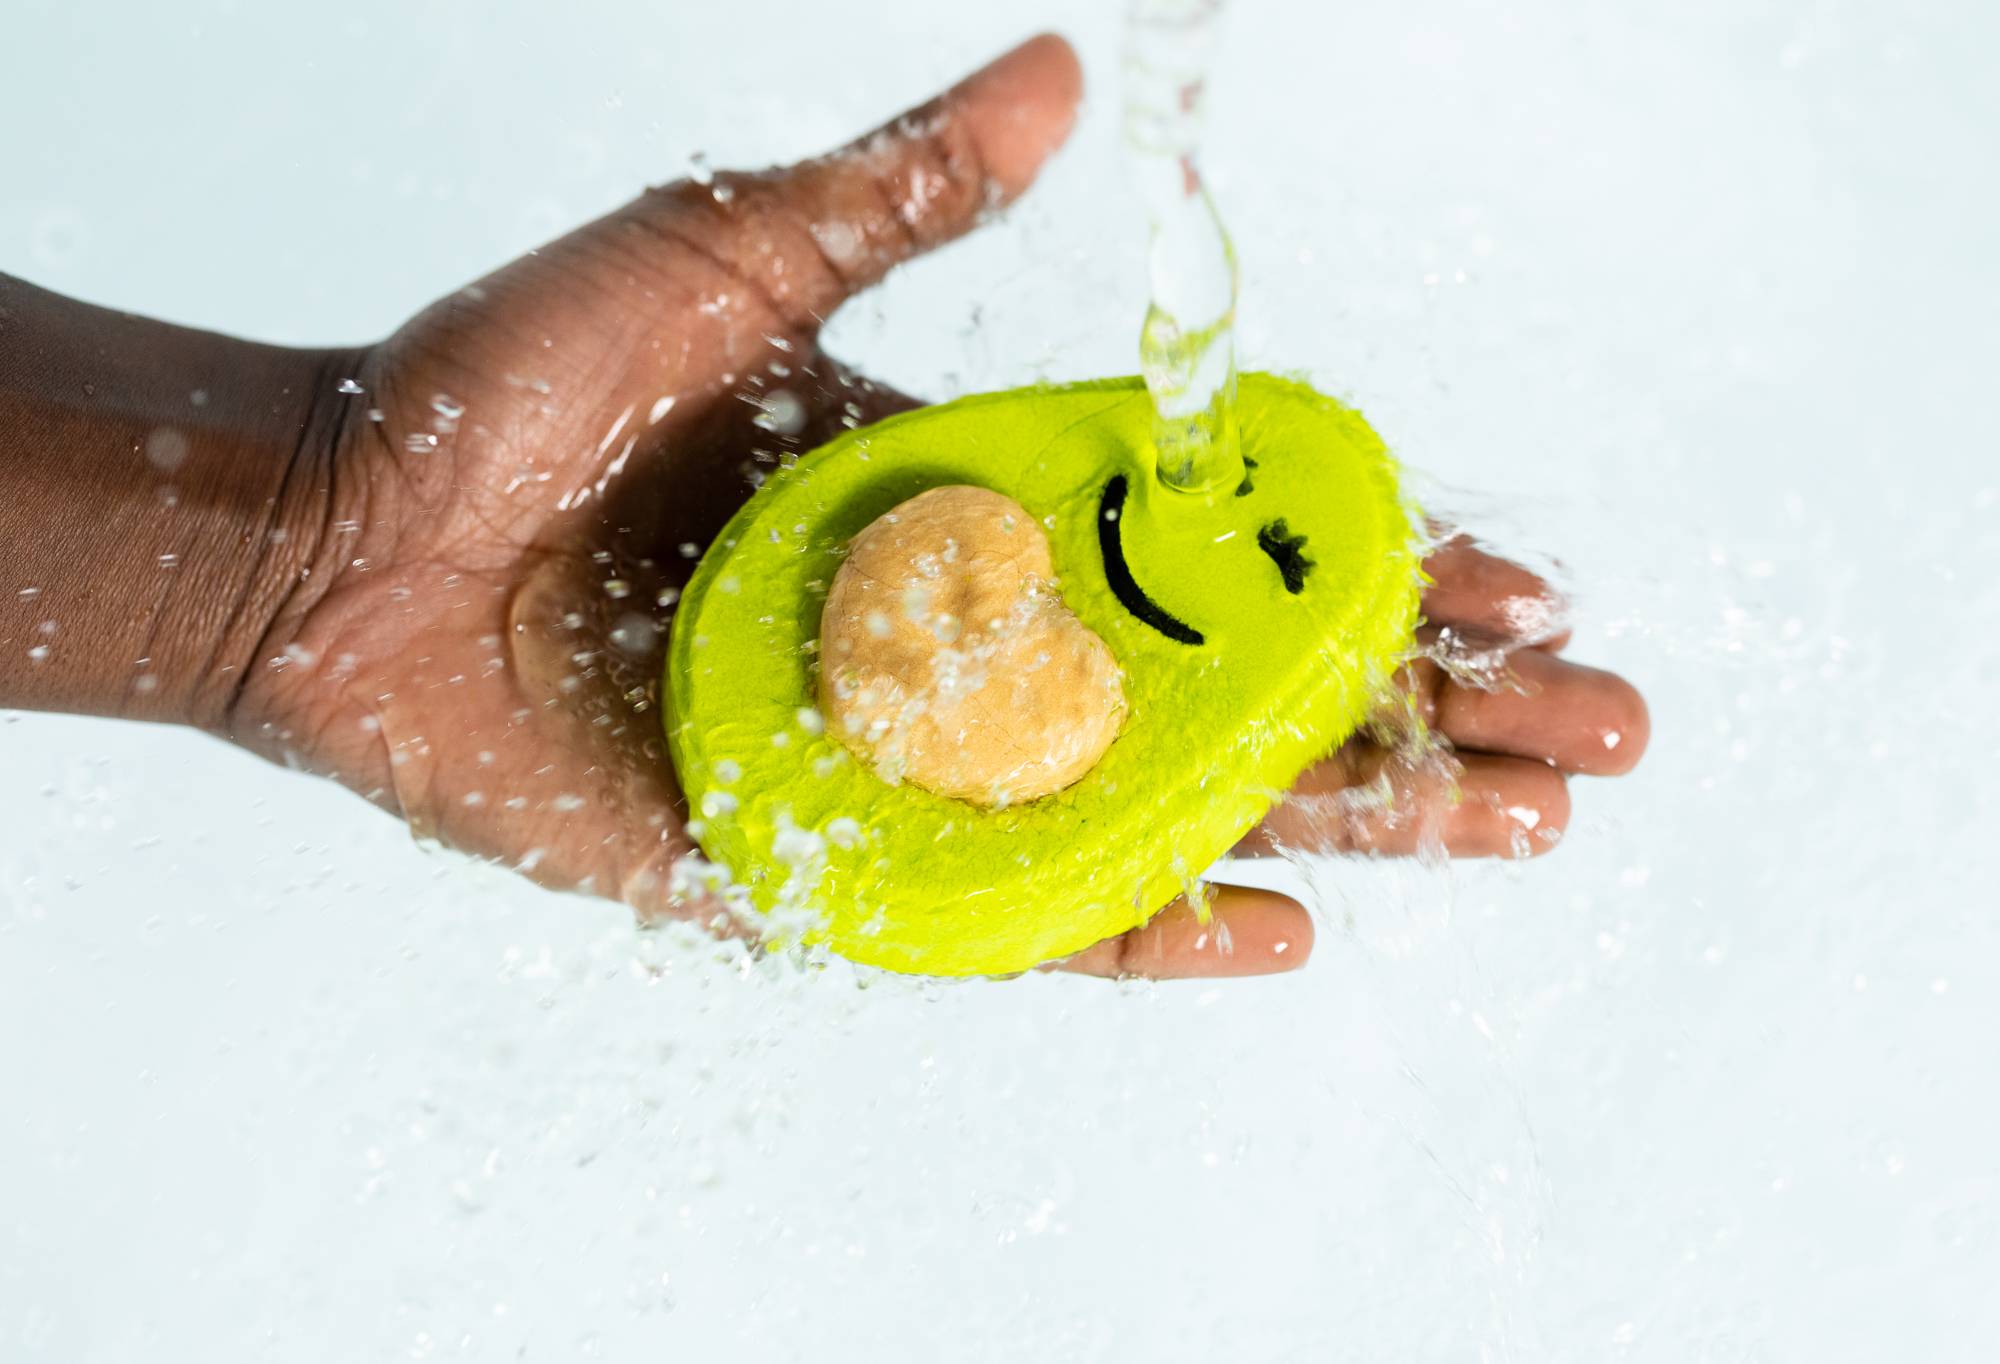 Image shows the model's hand holding the Avo Cuddle bubble bar under running water. 